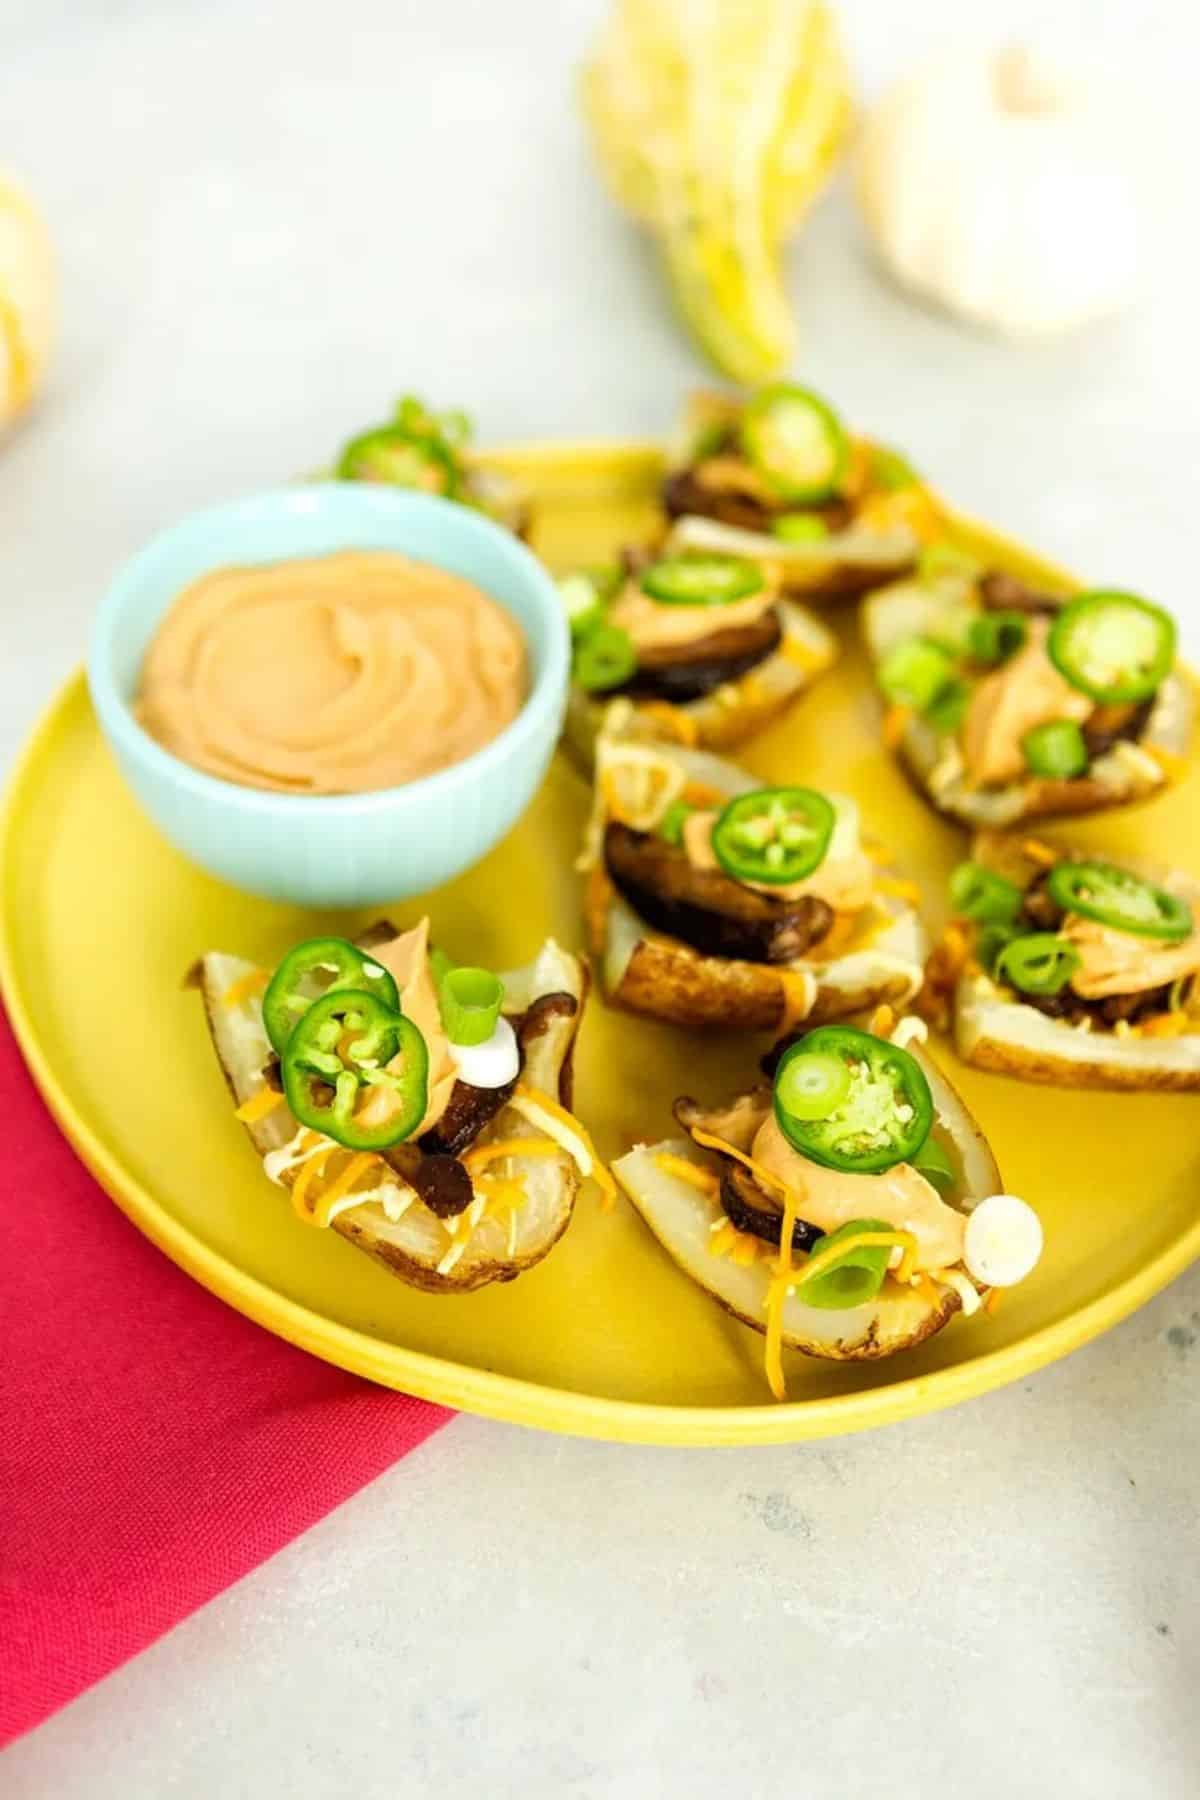 Vegan bacon loaded potato skins with a bowl of dip on a yellow tray.